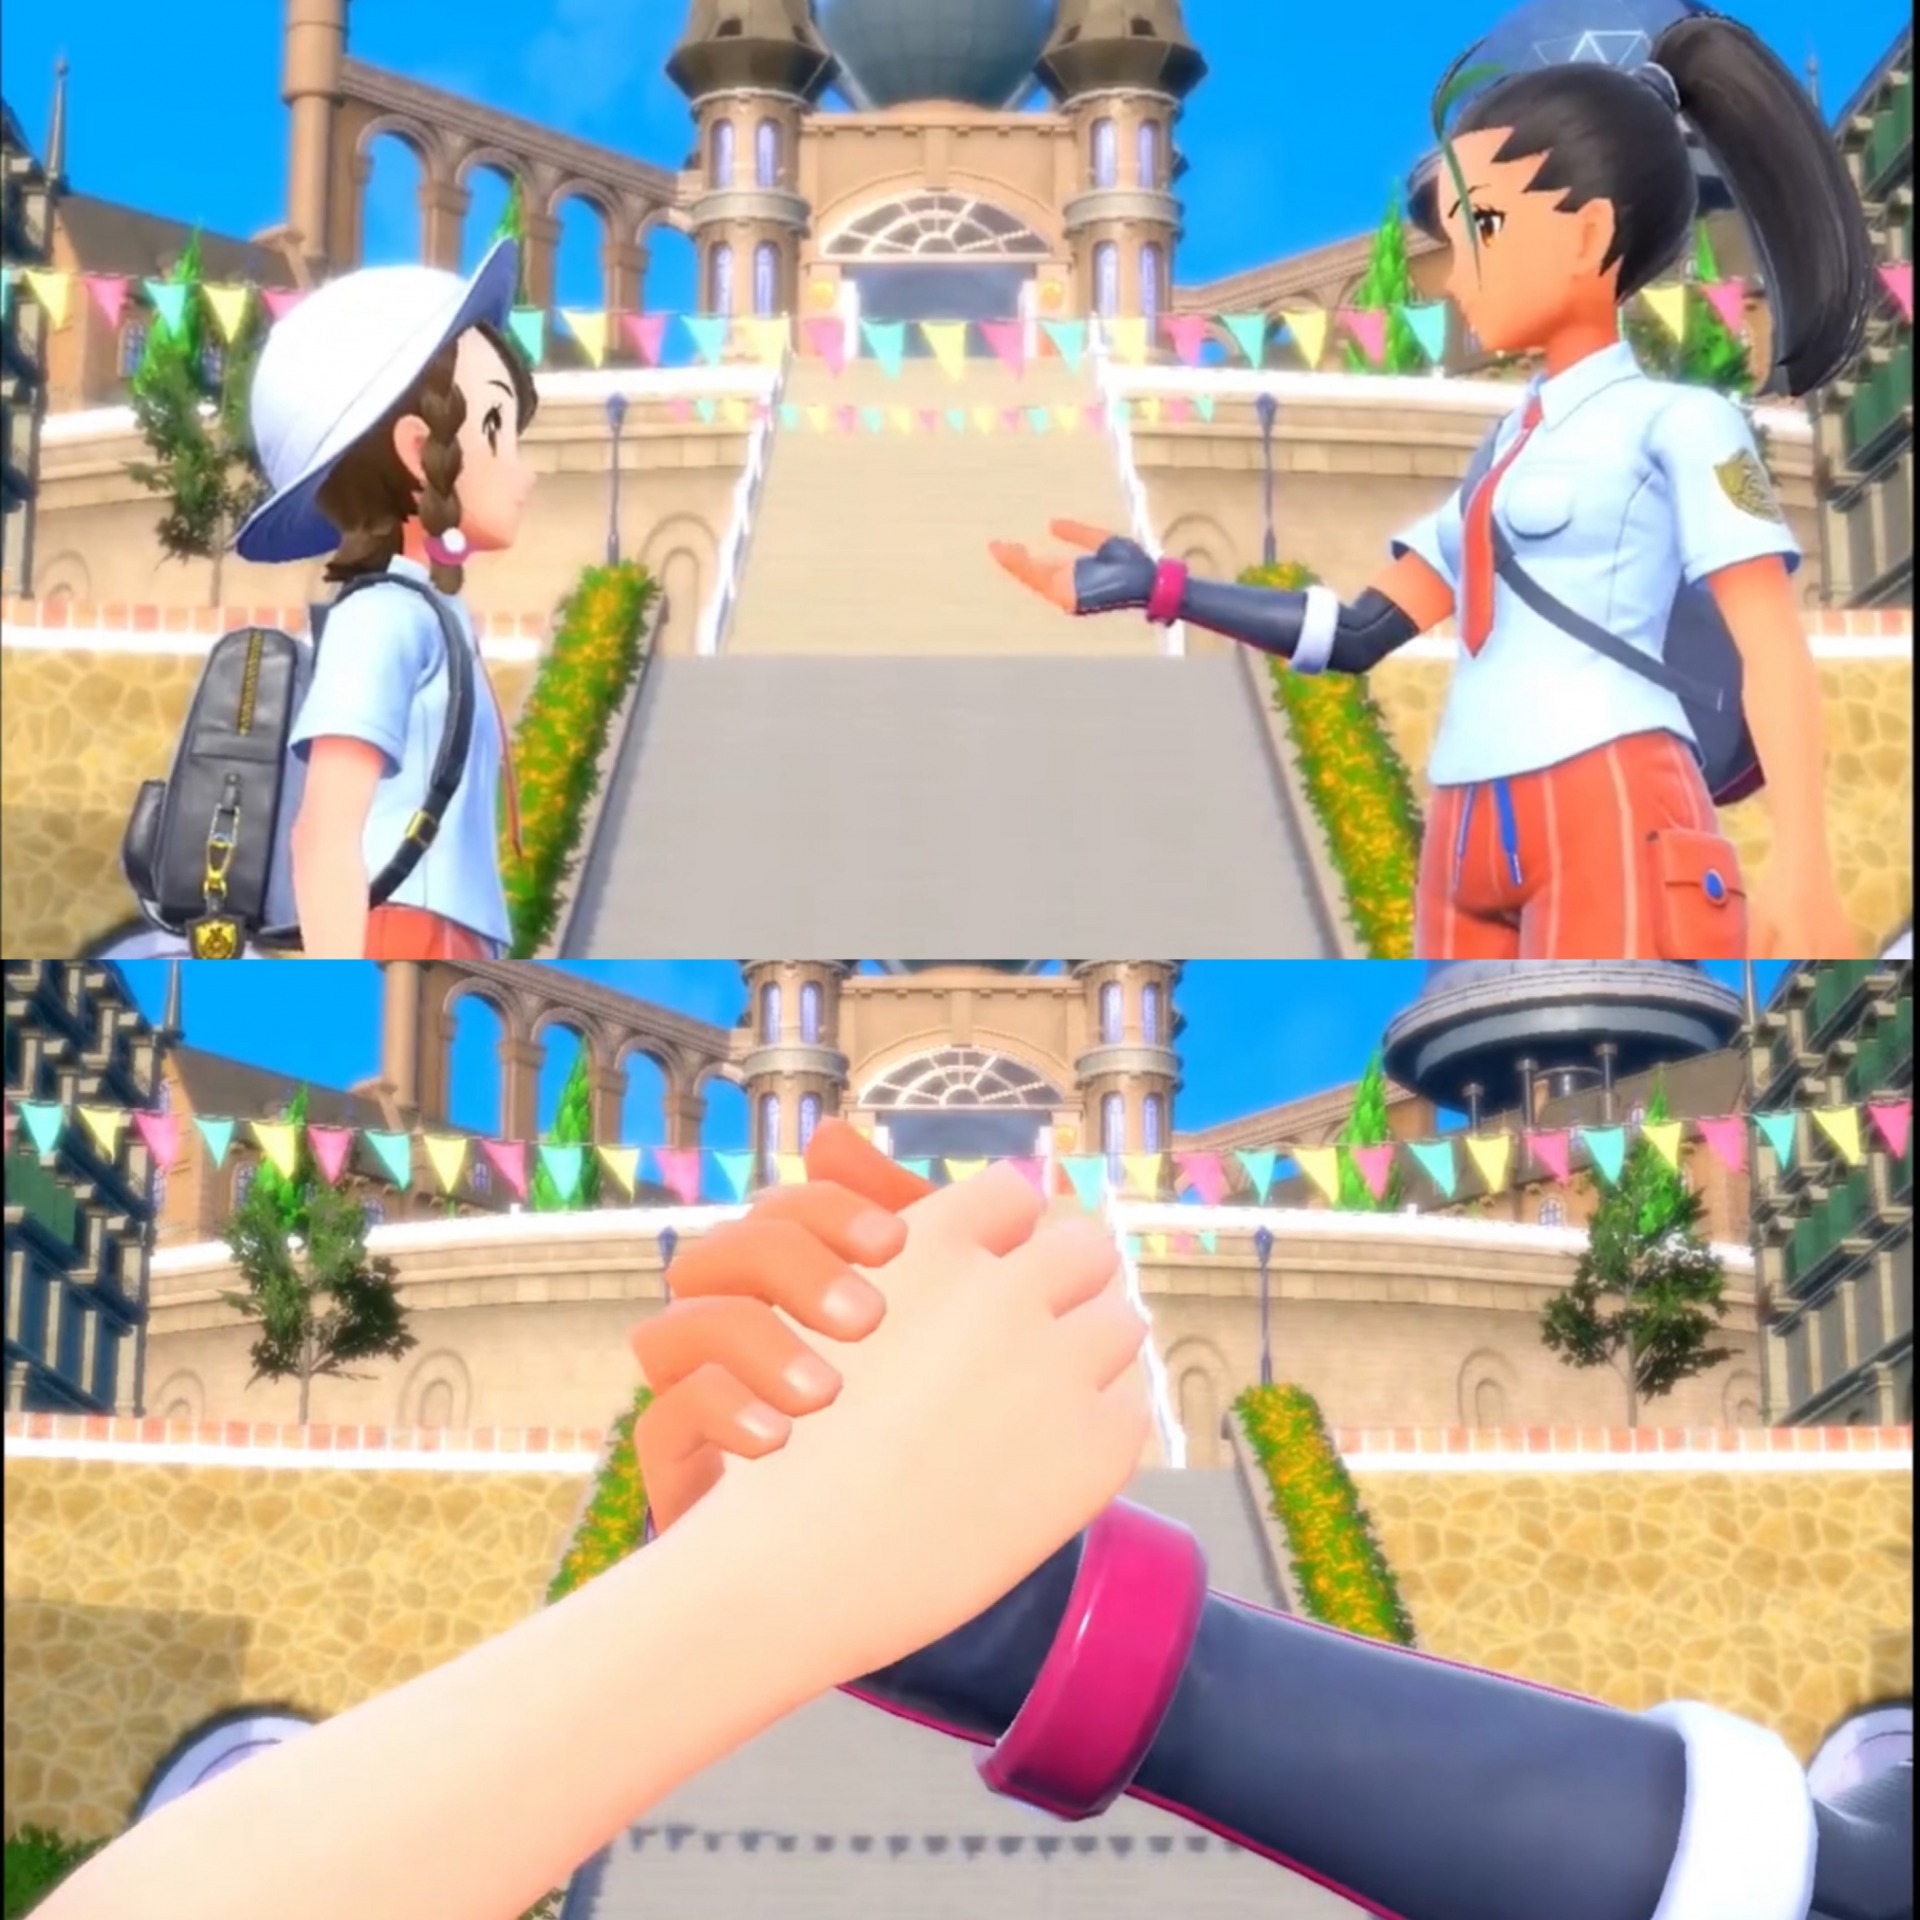 Nemona handshaking with the protagonist/player character Blank Meme Template